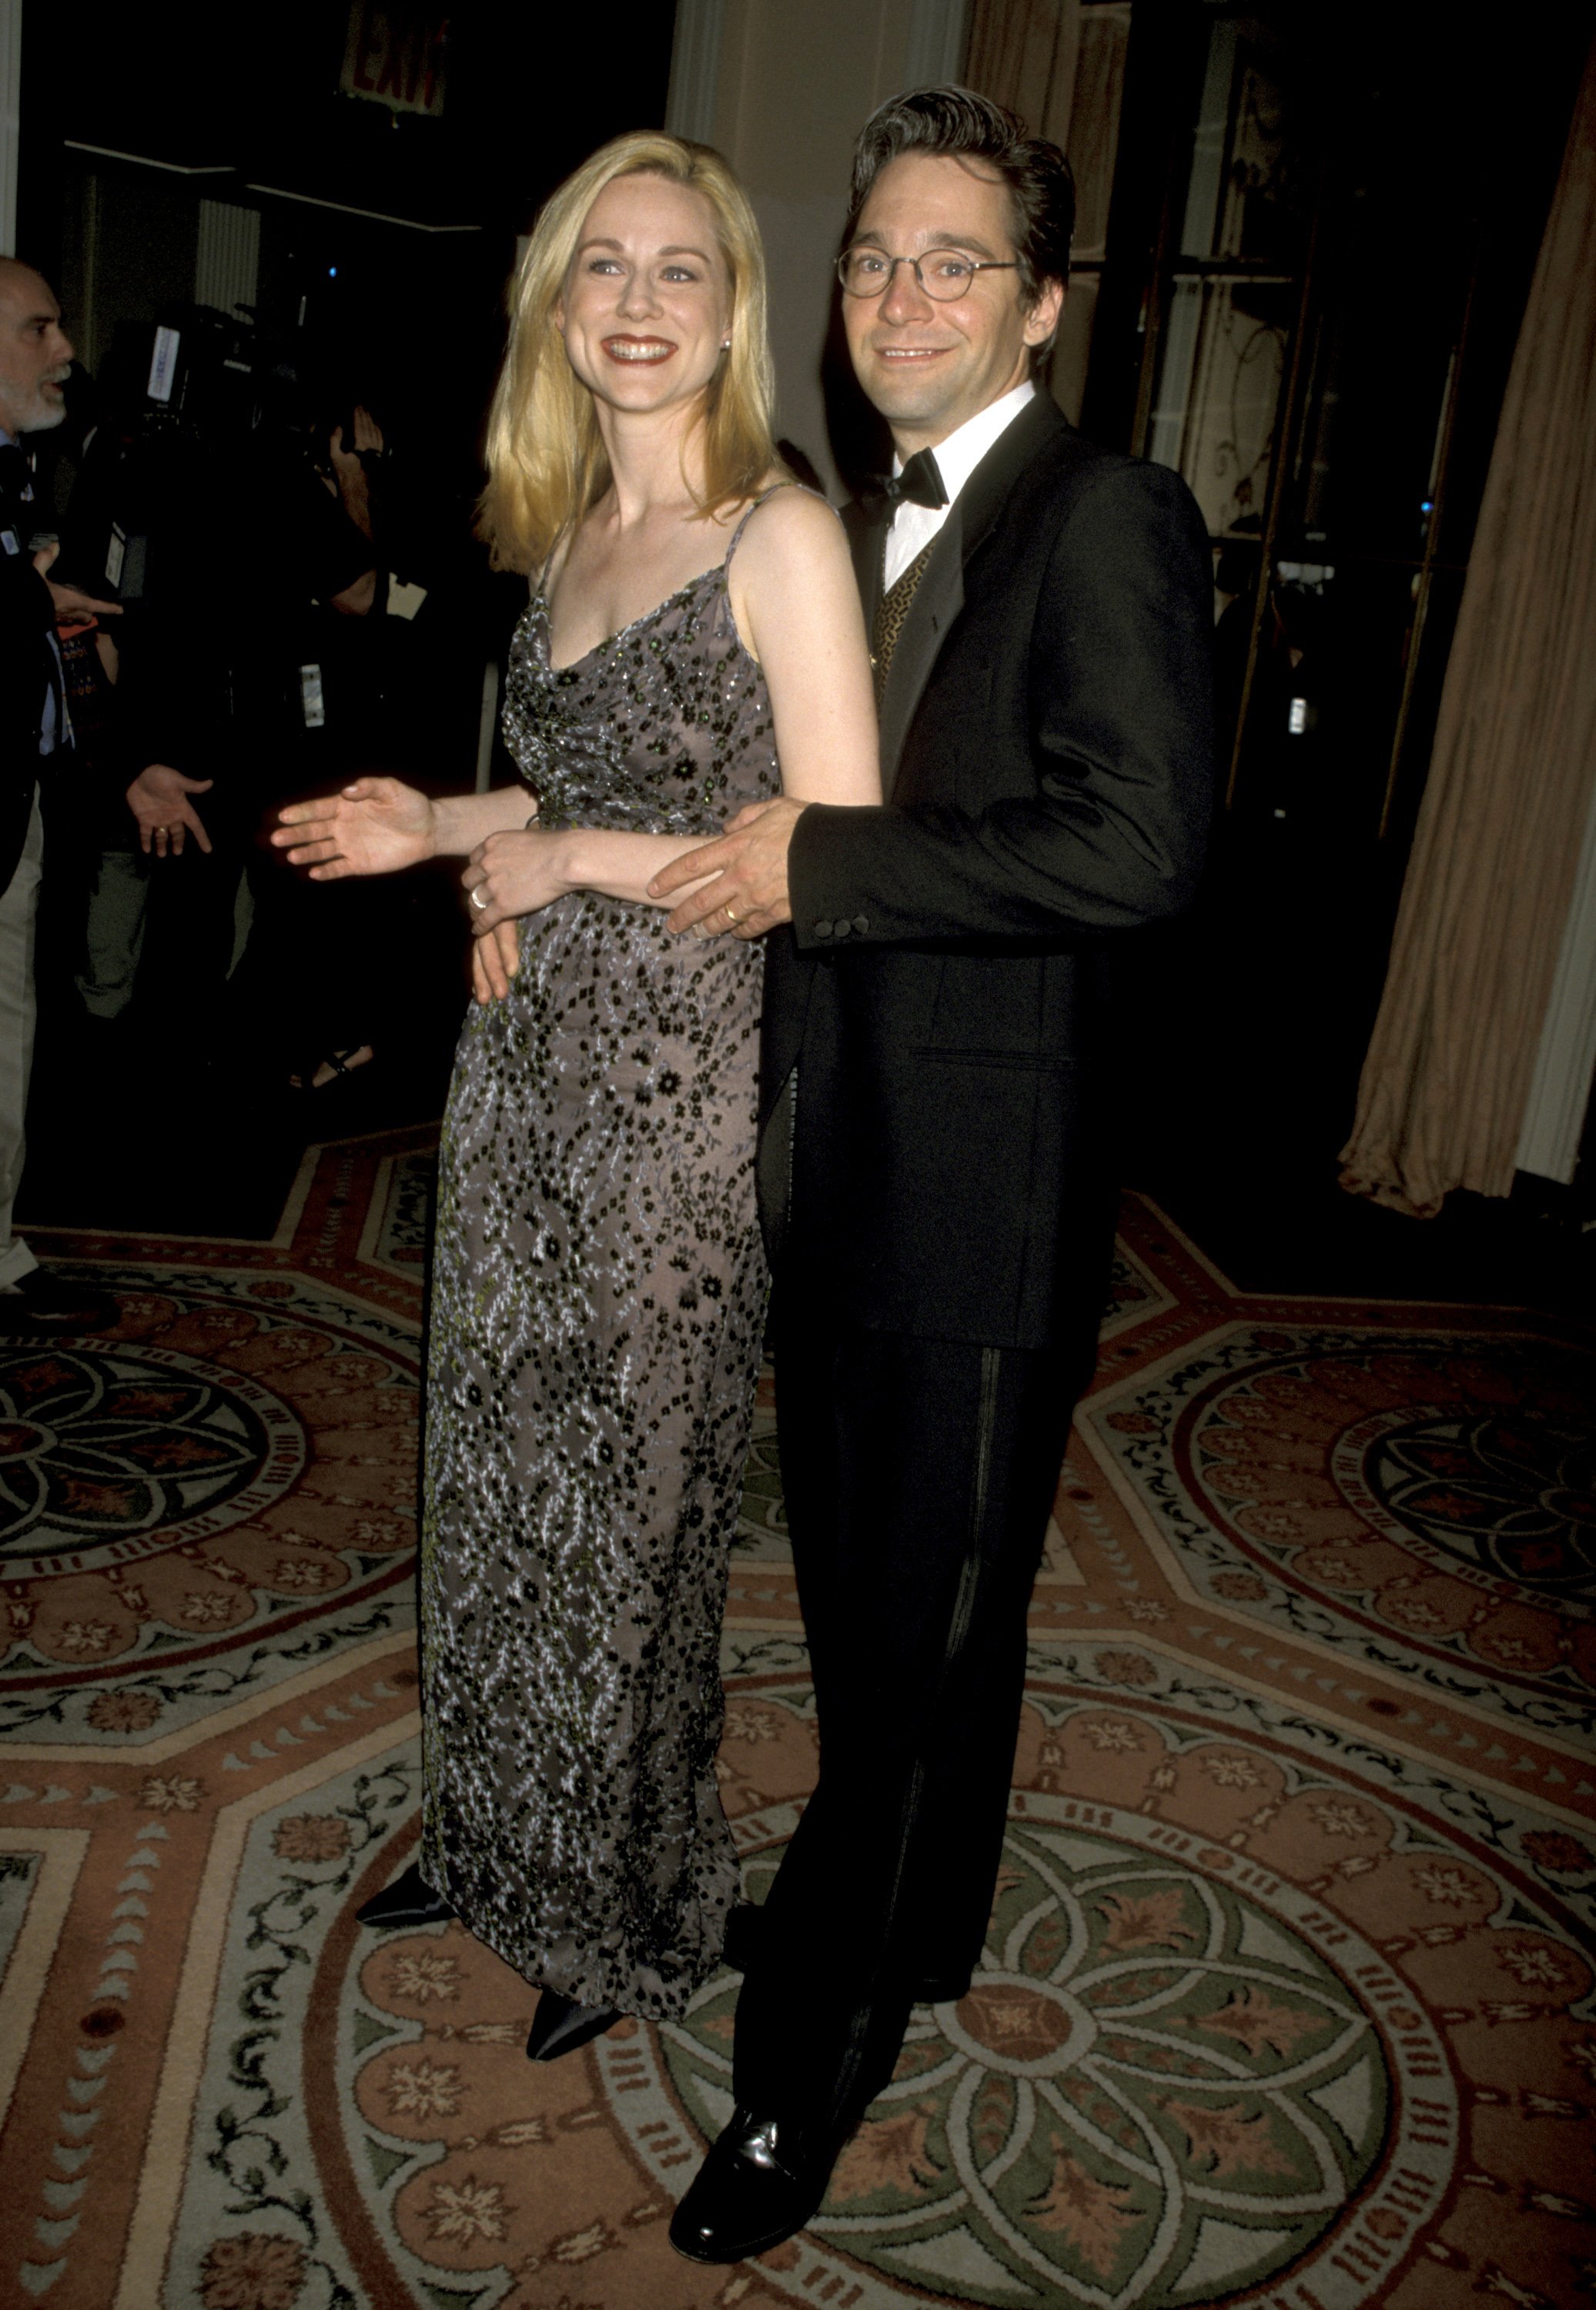 Laura Linney and her husband David Adkins during The IRTS Gold Medal Awards at Waldorf Astoria in New York City, New York. / Source: Getty Images